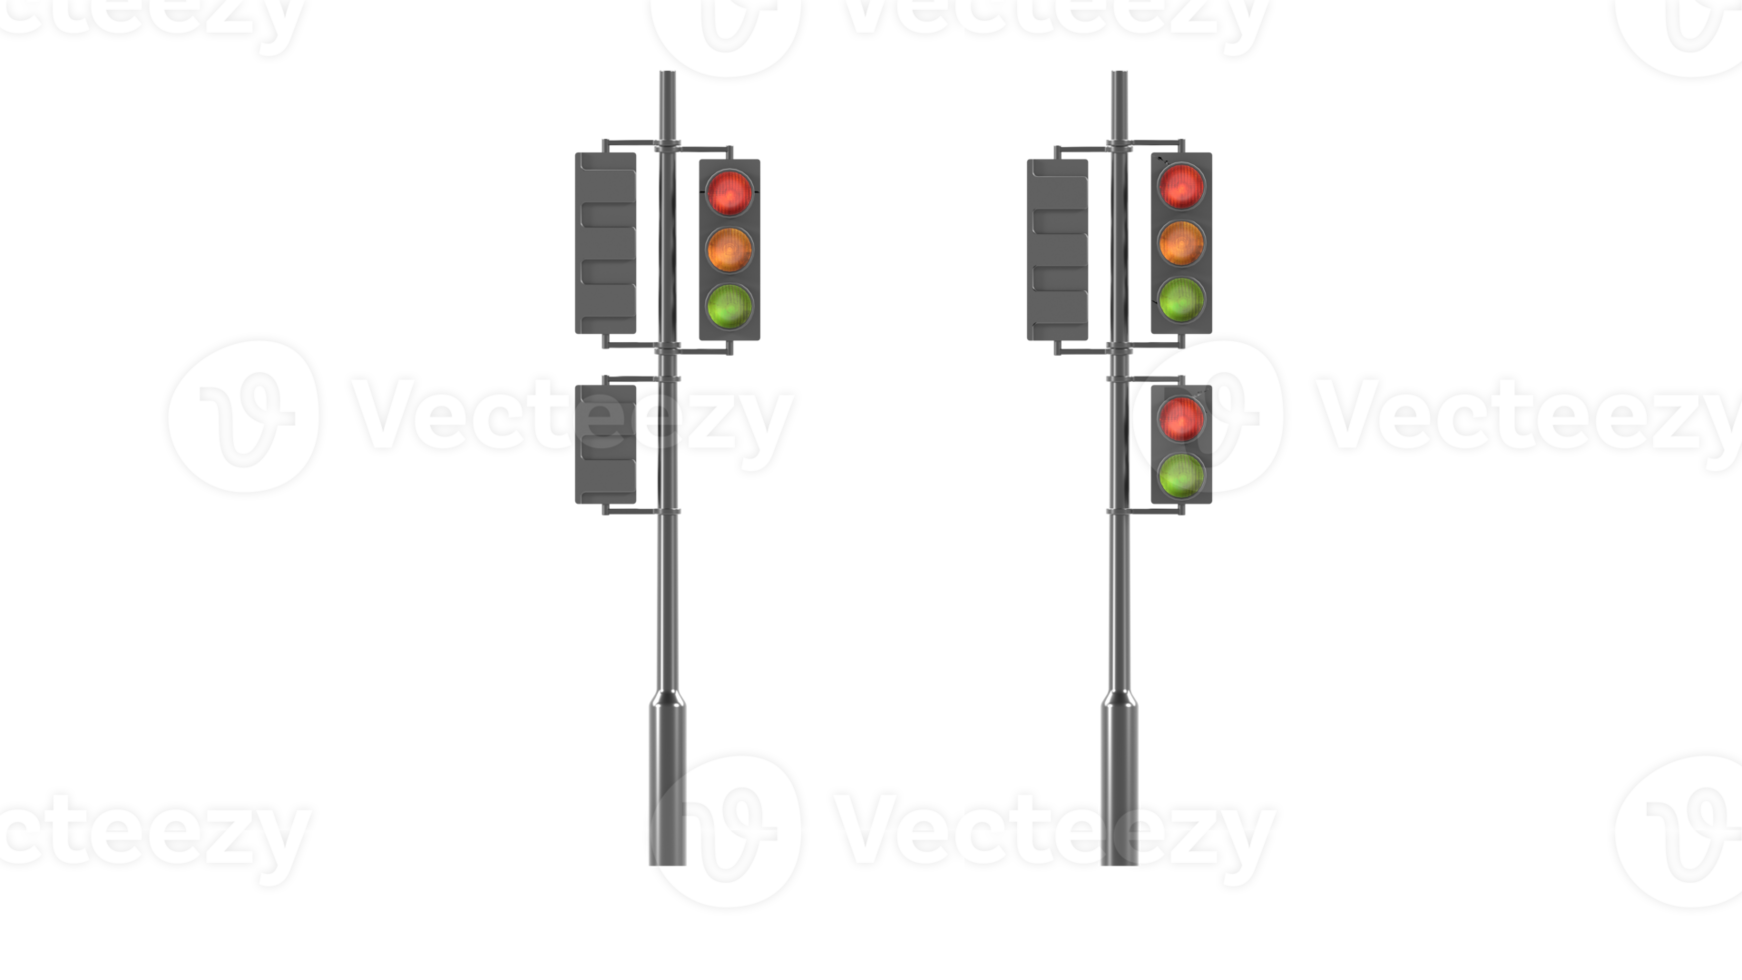 3D rendering Traffic lights with all three colors on, Road direction signs, city streets, urban traffic, driving concept, Control of transport movement on roadway, Highway code, road regulations, safe png